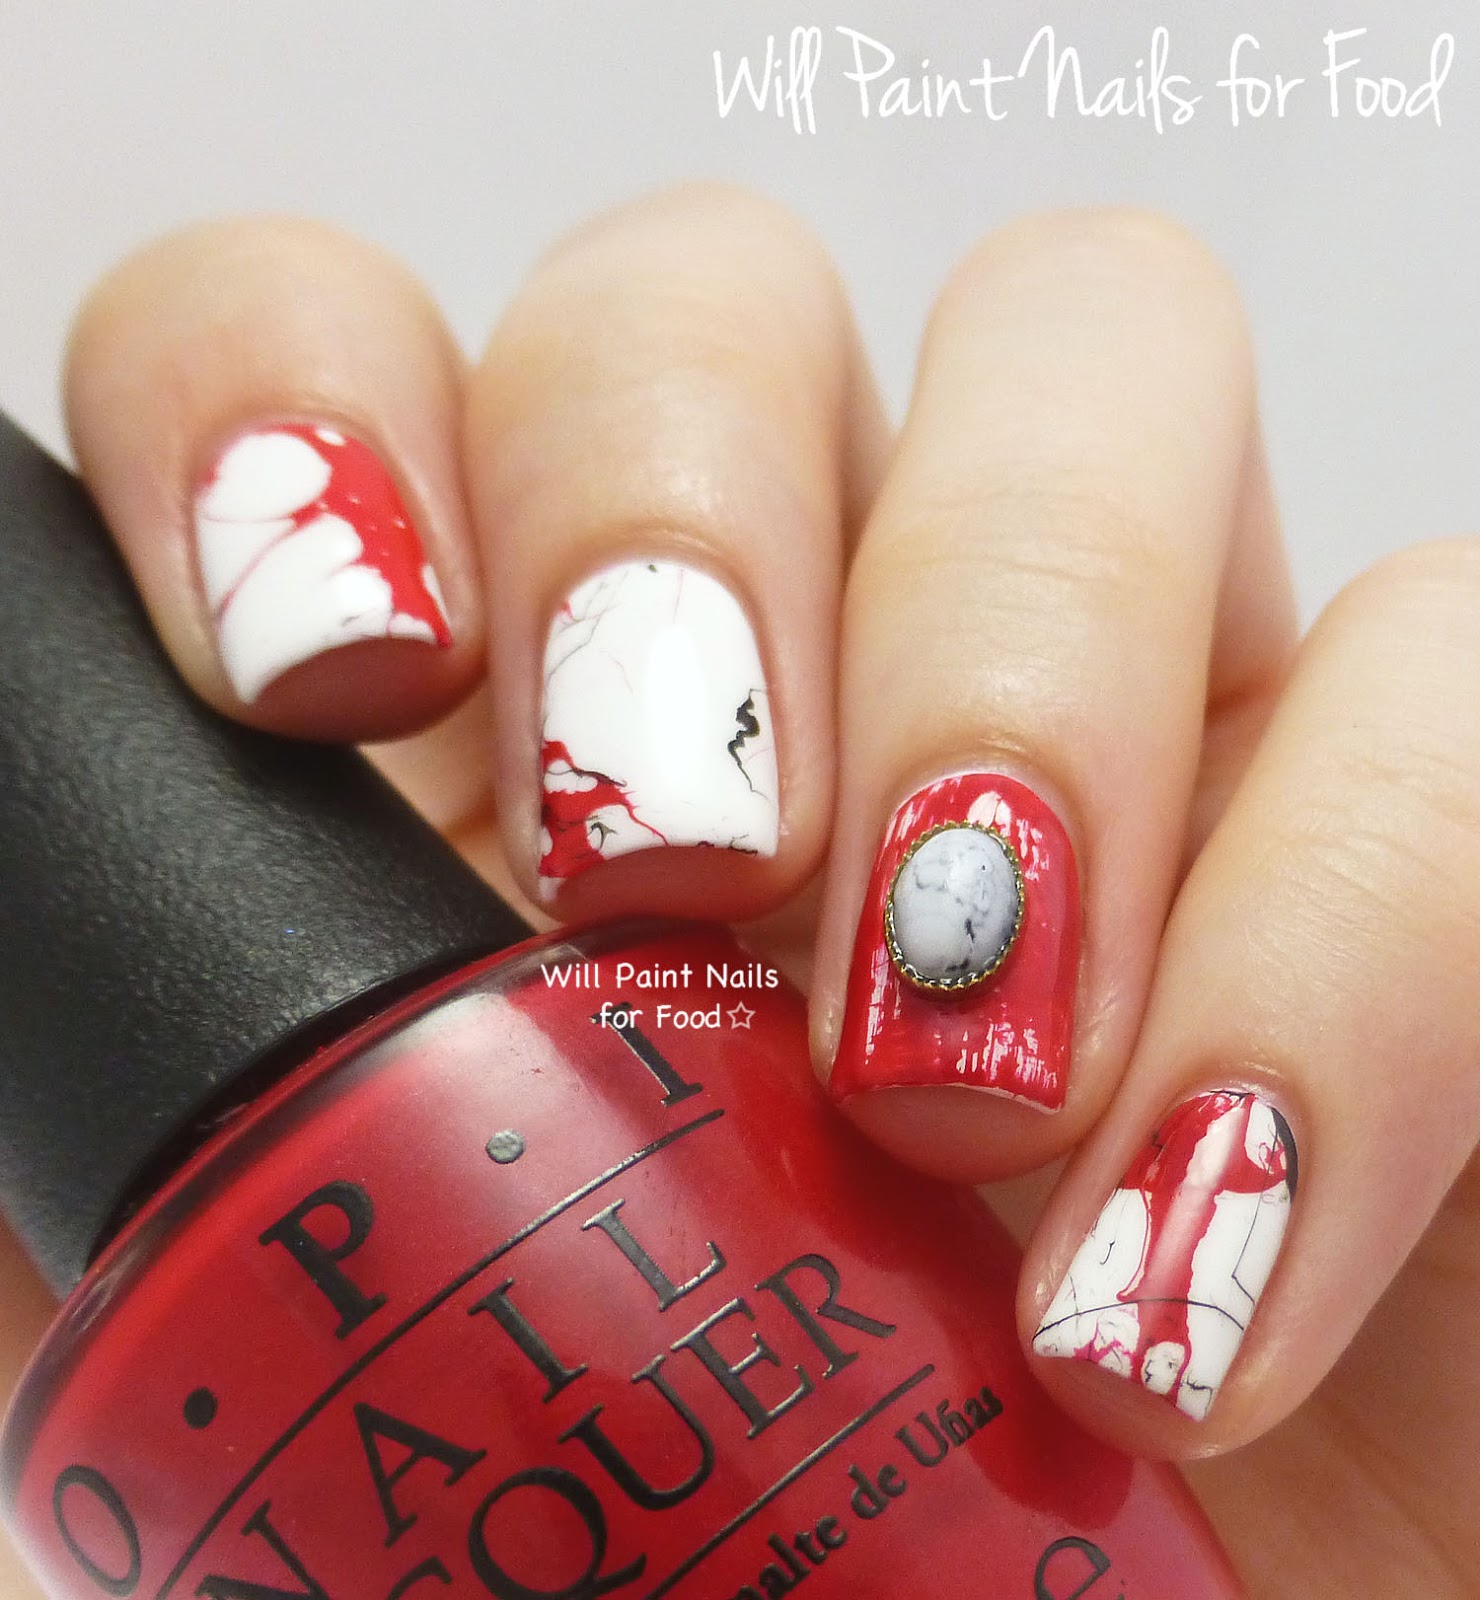 Will Paint Nails for Food: The 31 Day Nail Art Challenge 2.0, Day One: Red